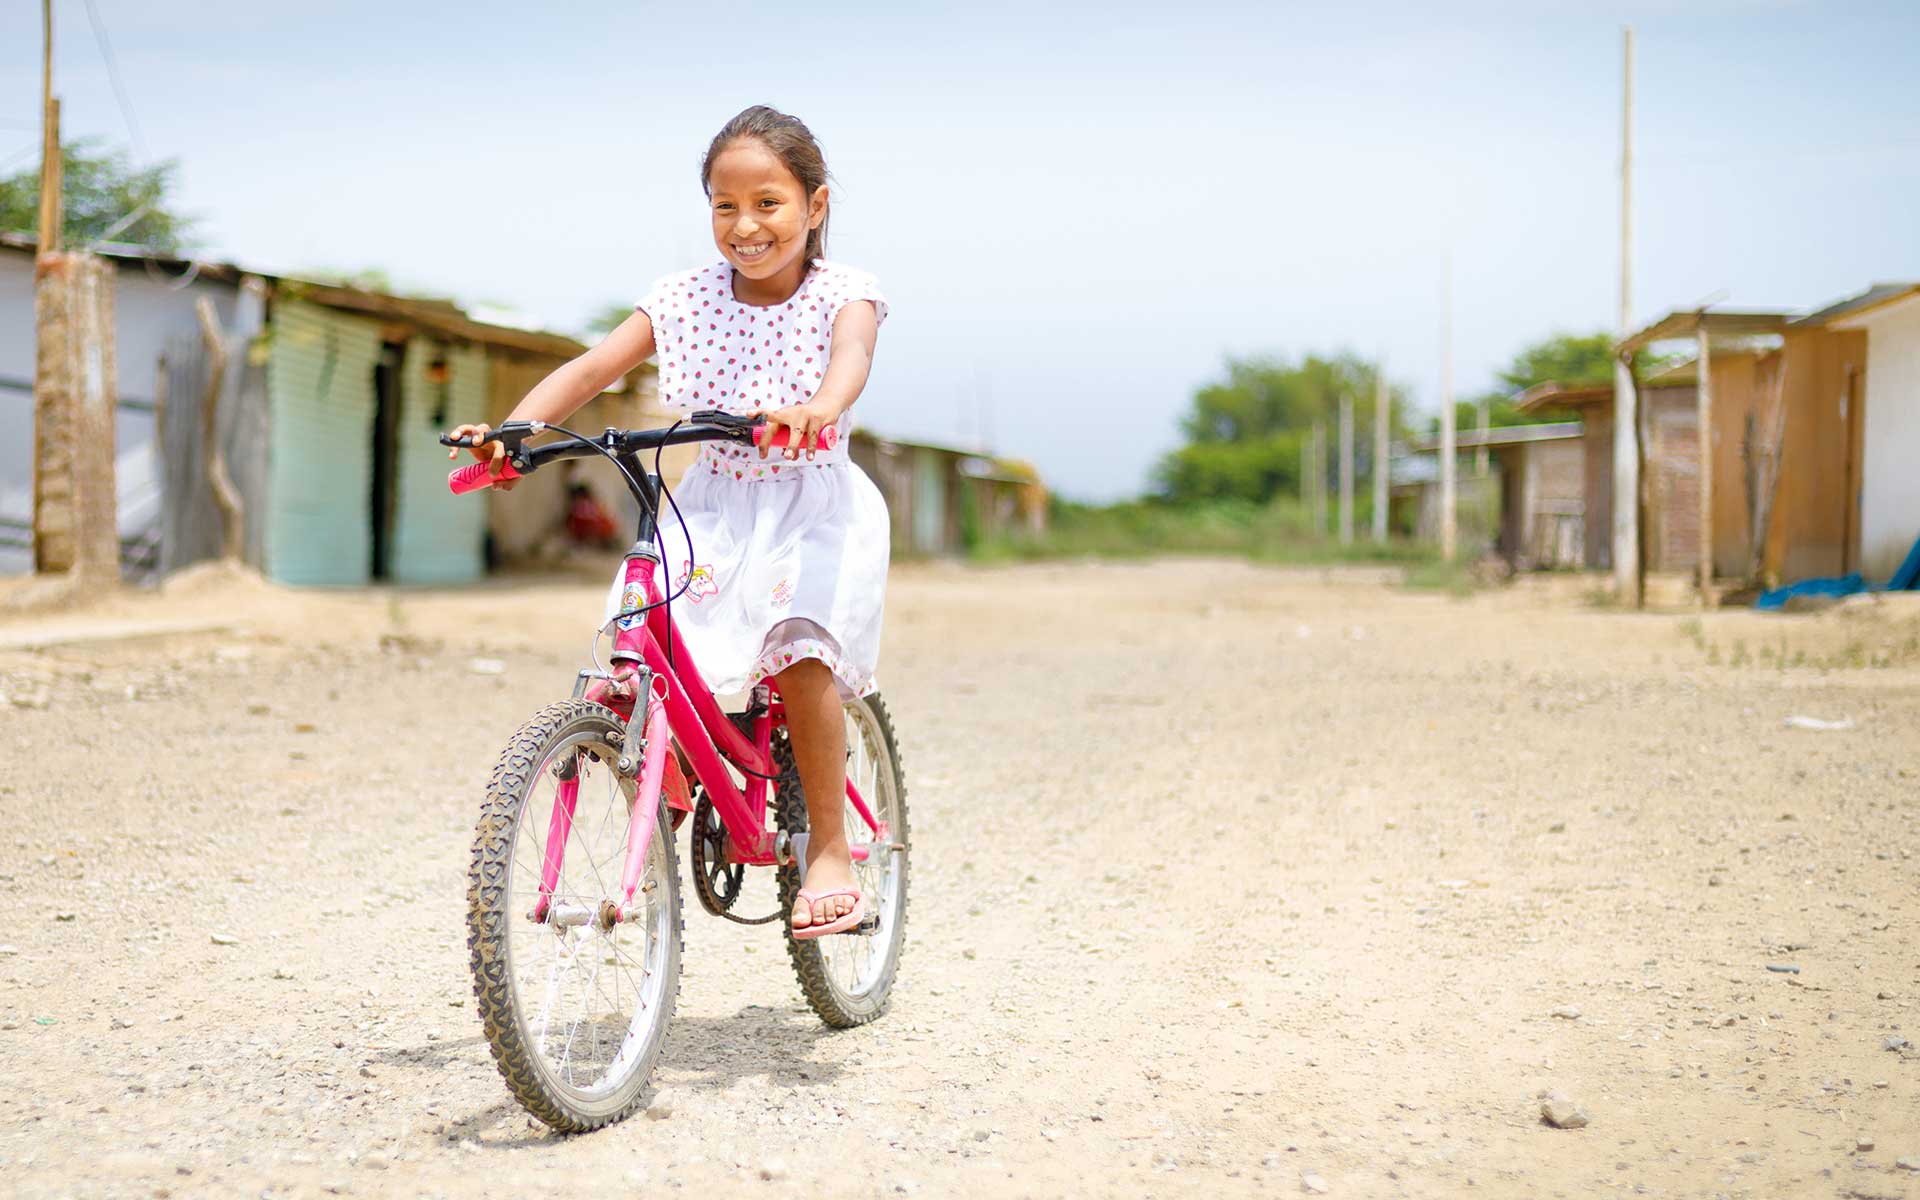 A young girl rides her bicycle through her neighborhood in Peru